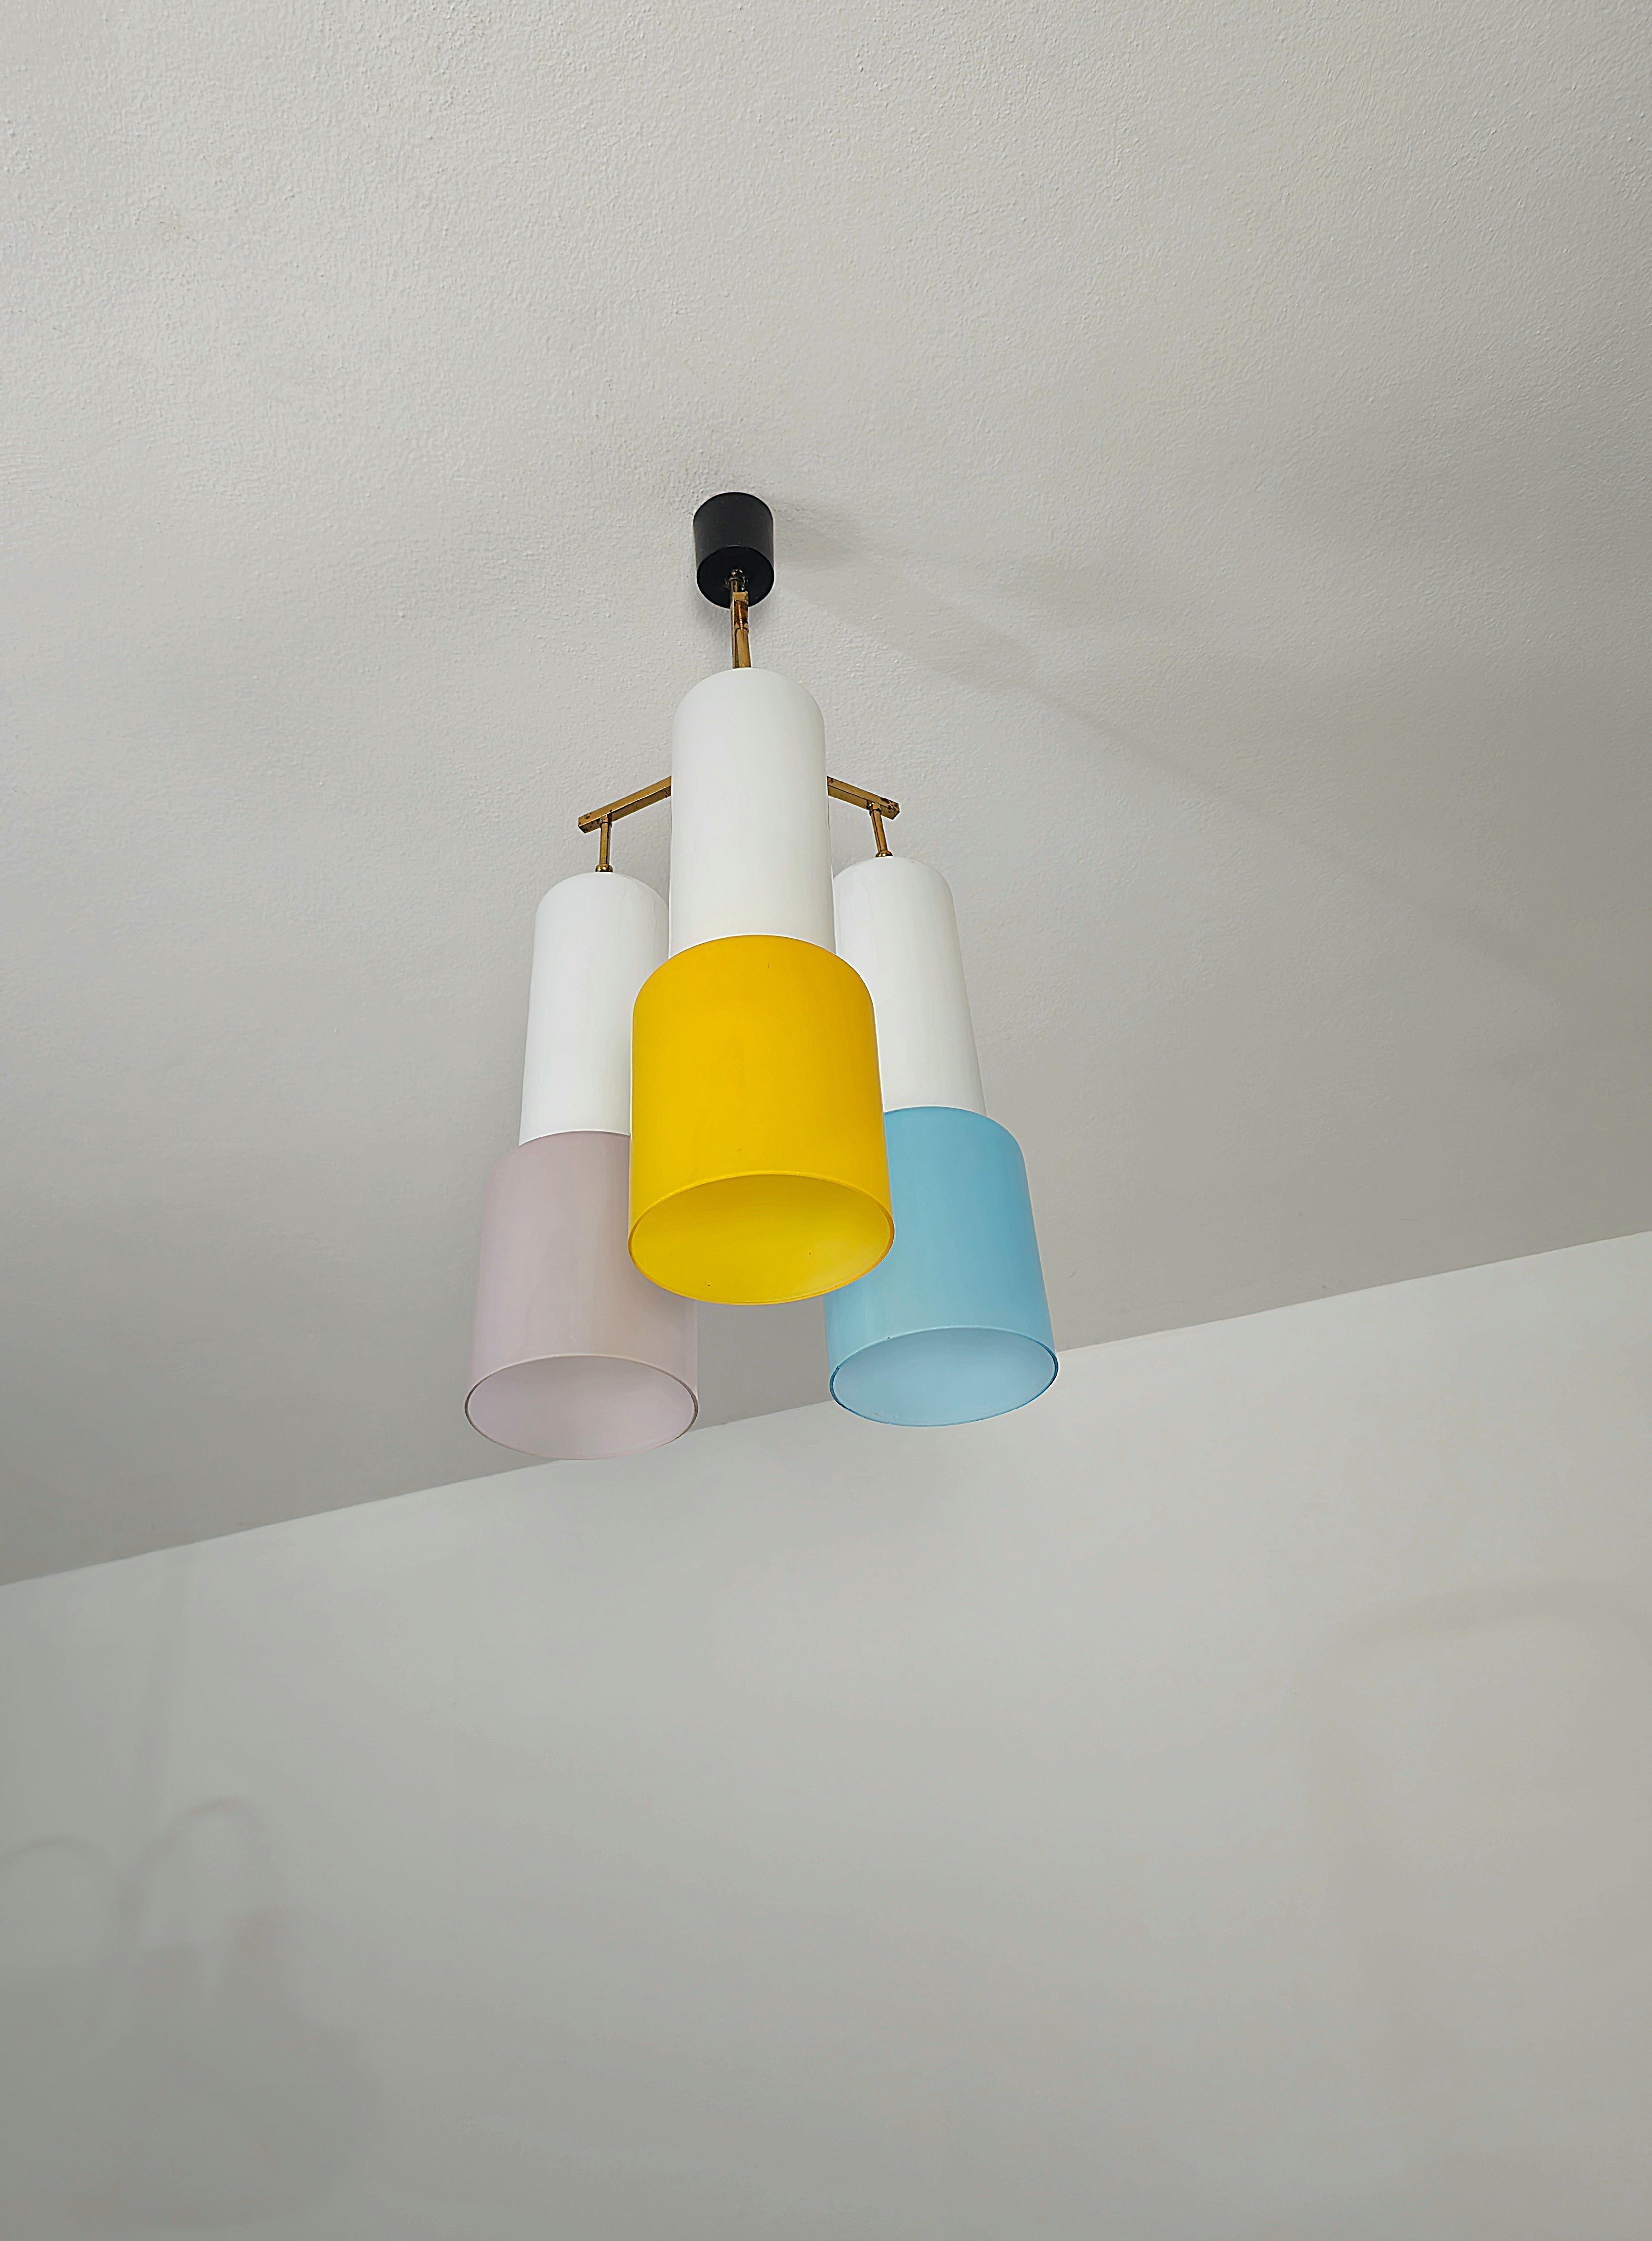 Chandelier Pendant Brass Milk Glass Attributed to Stilnovo Midcentury Italy 1960 In Good Condition For Sale In Palermo, IT